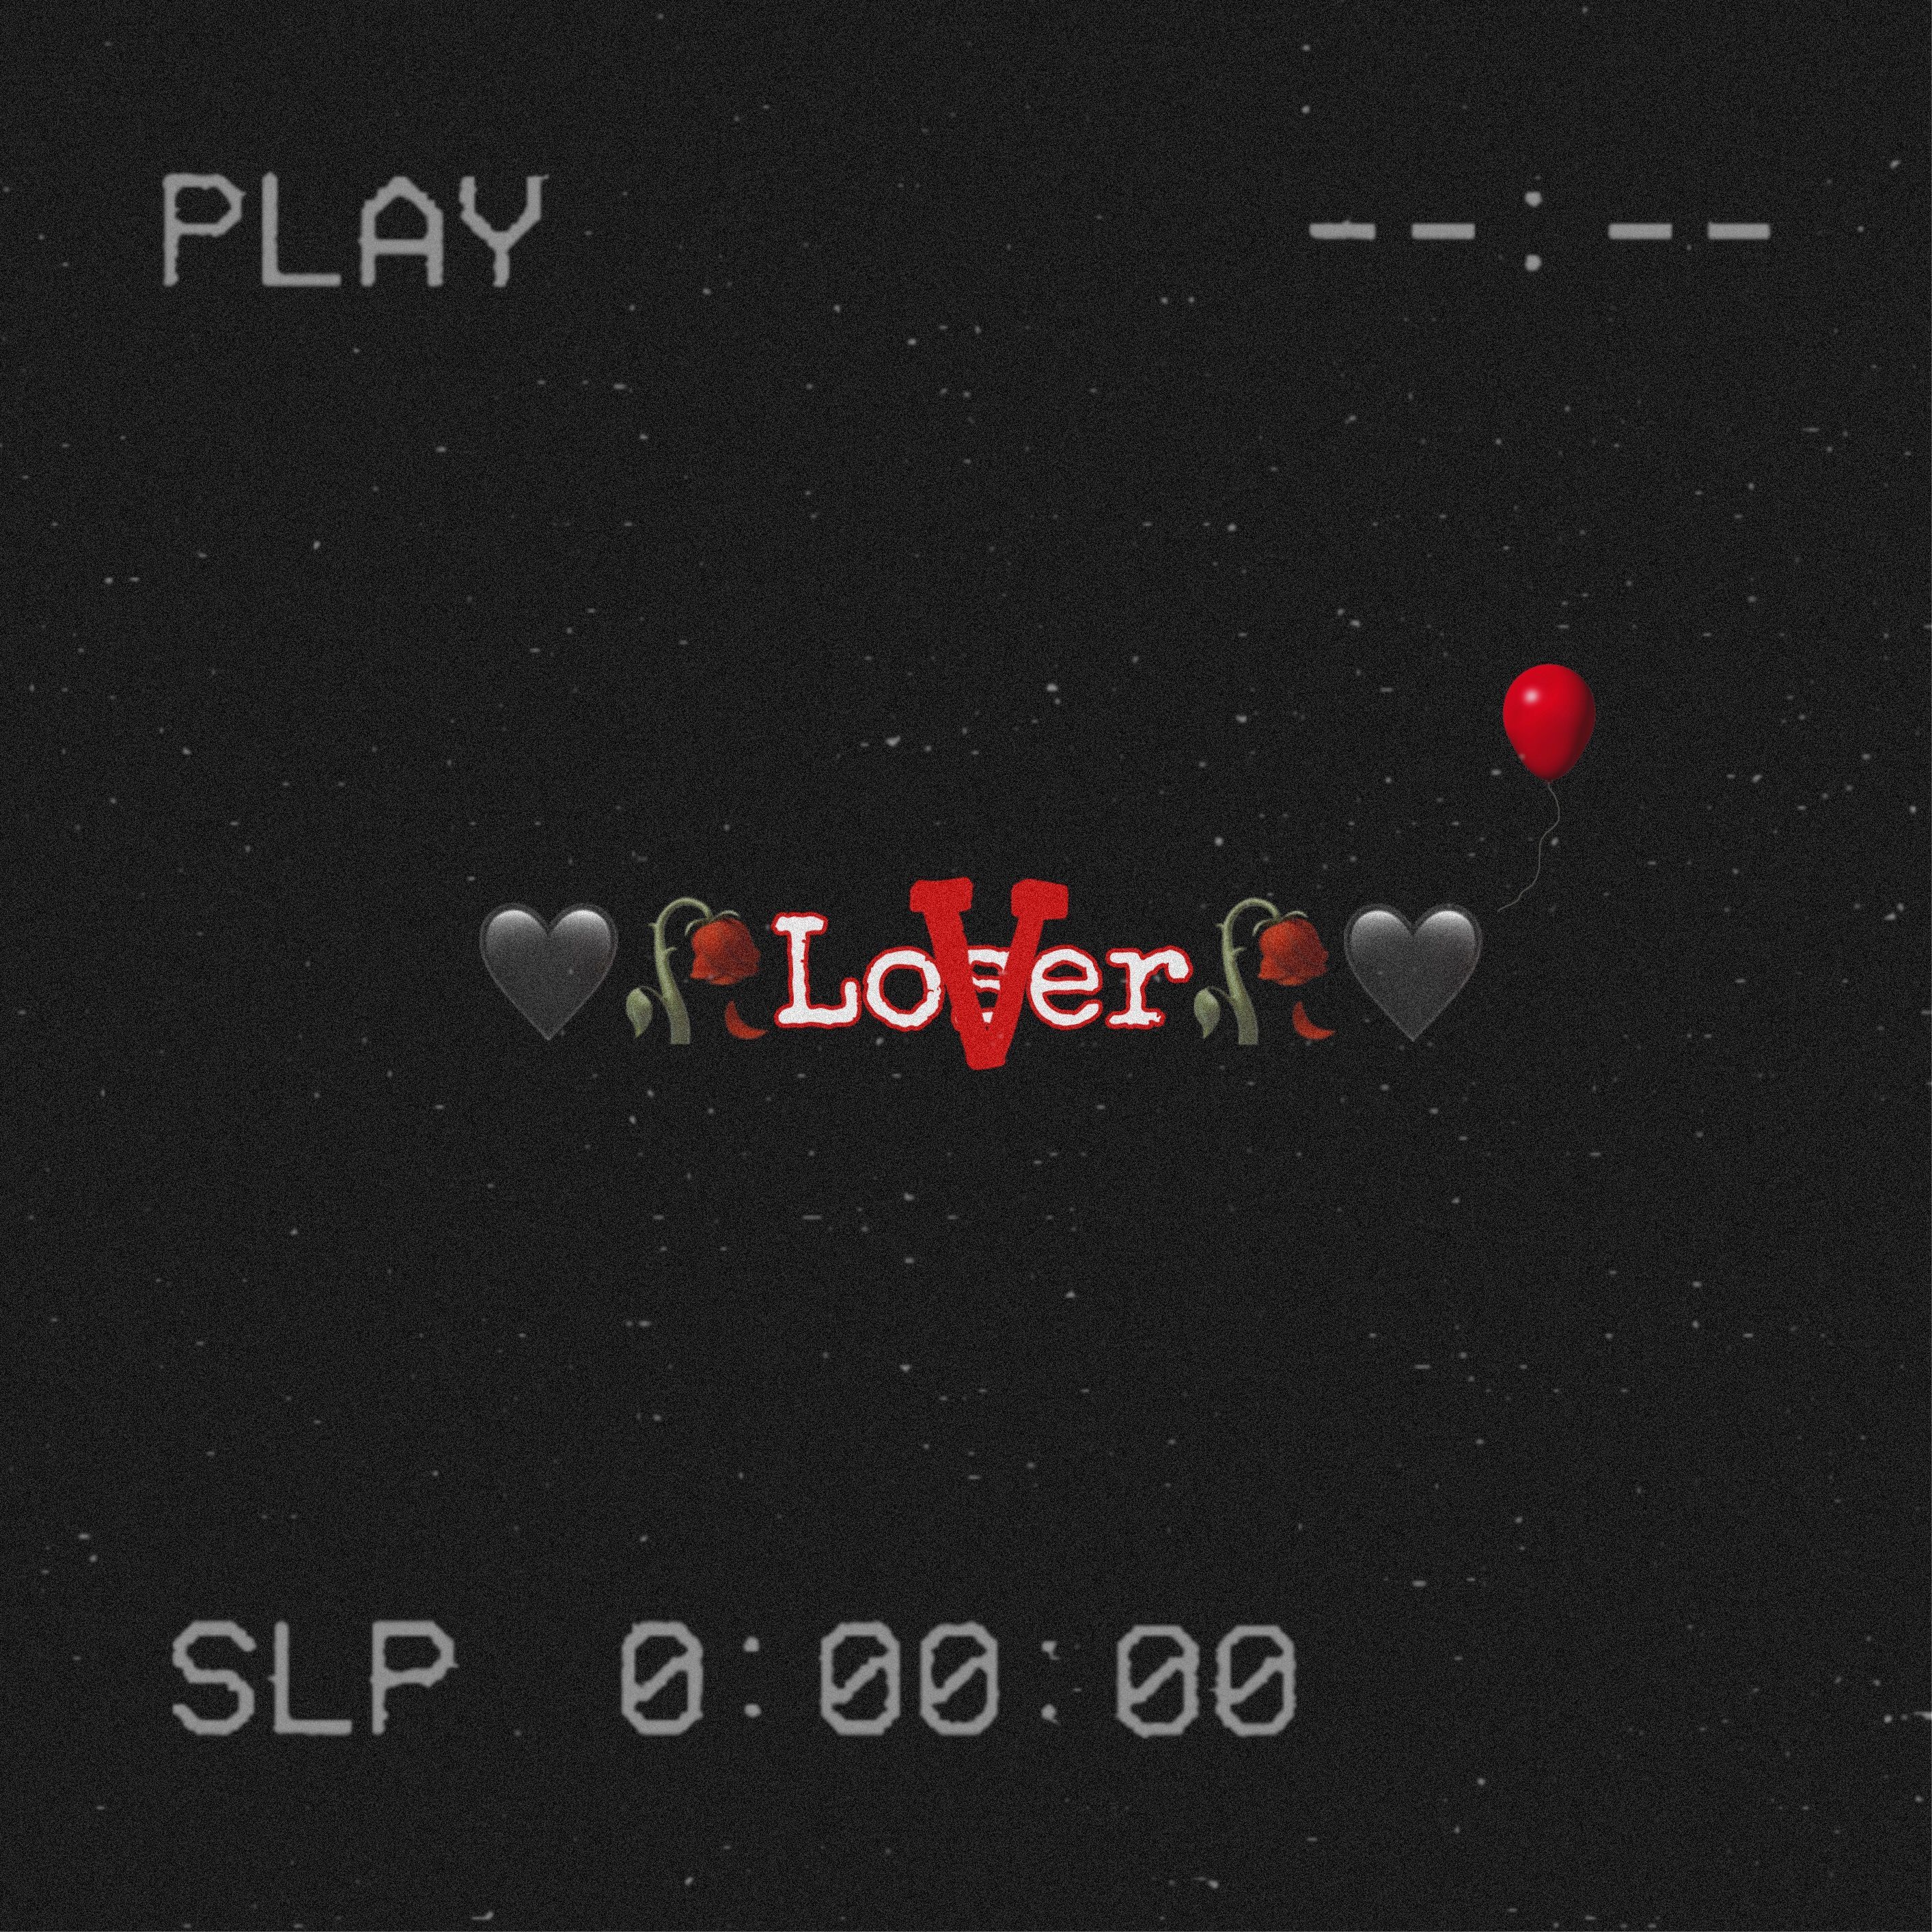 Loser Lover Wallpapers